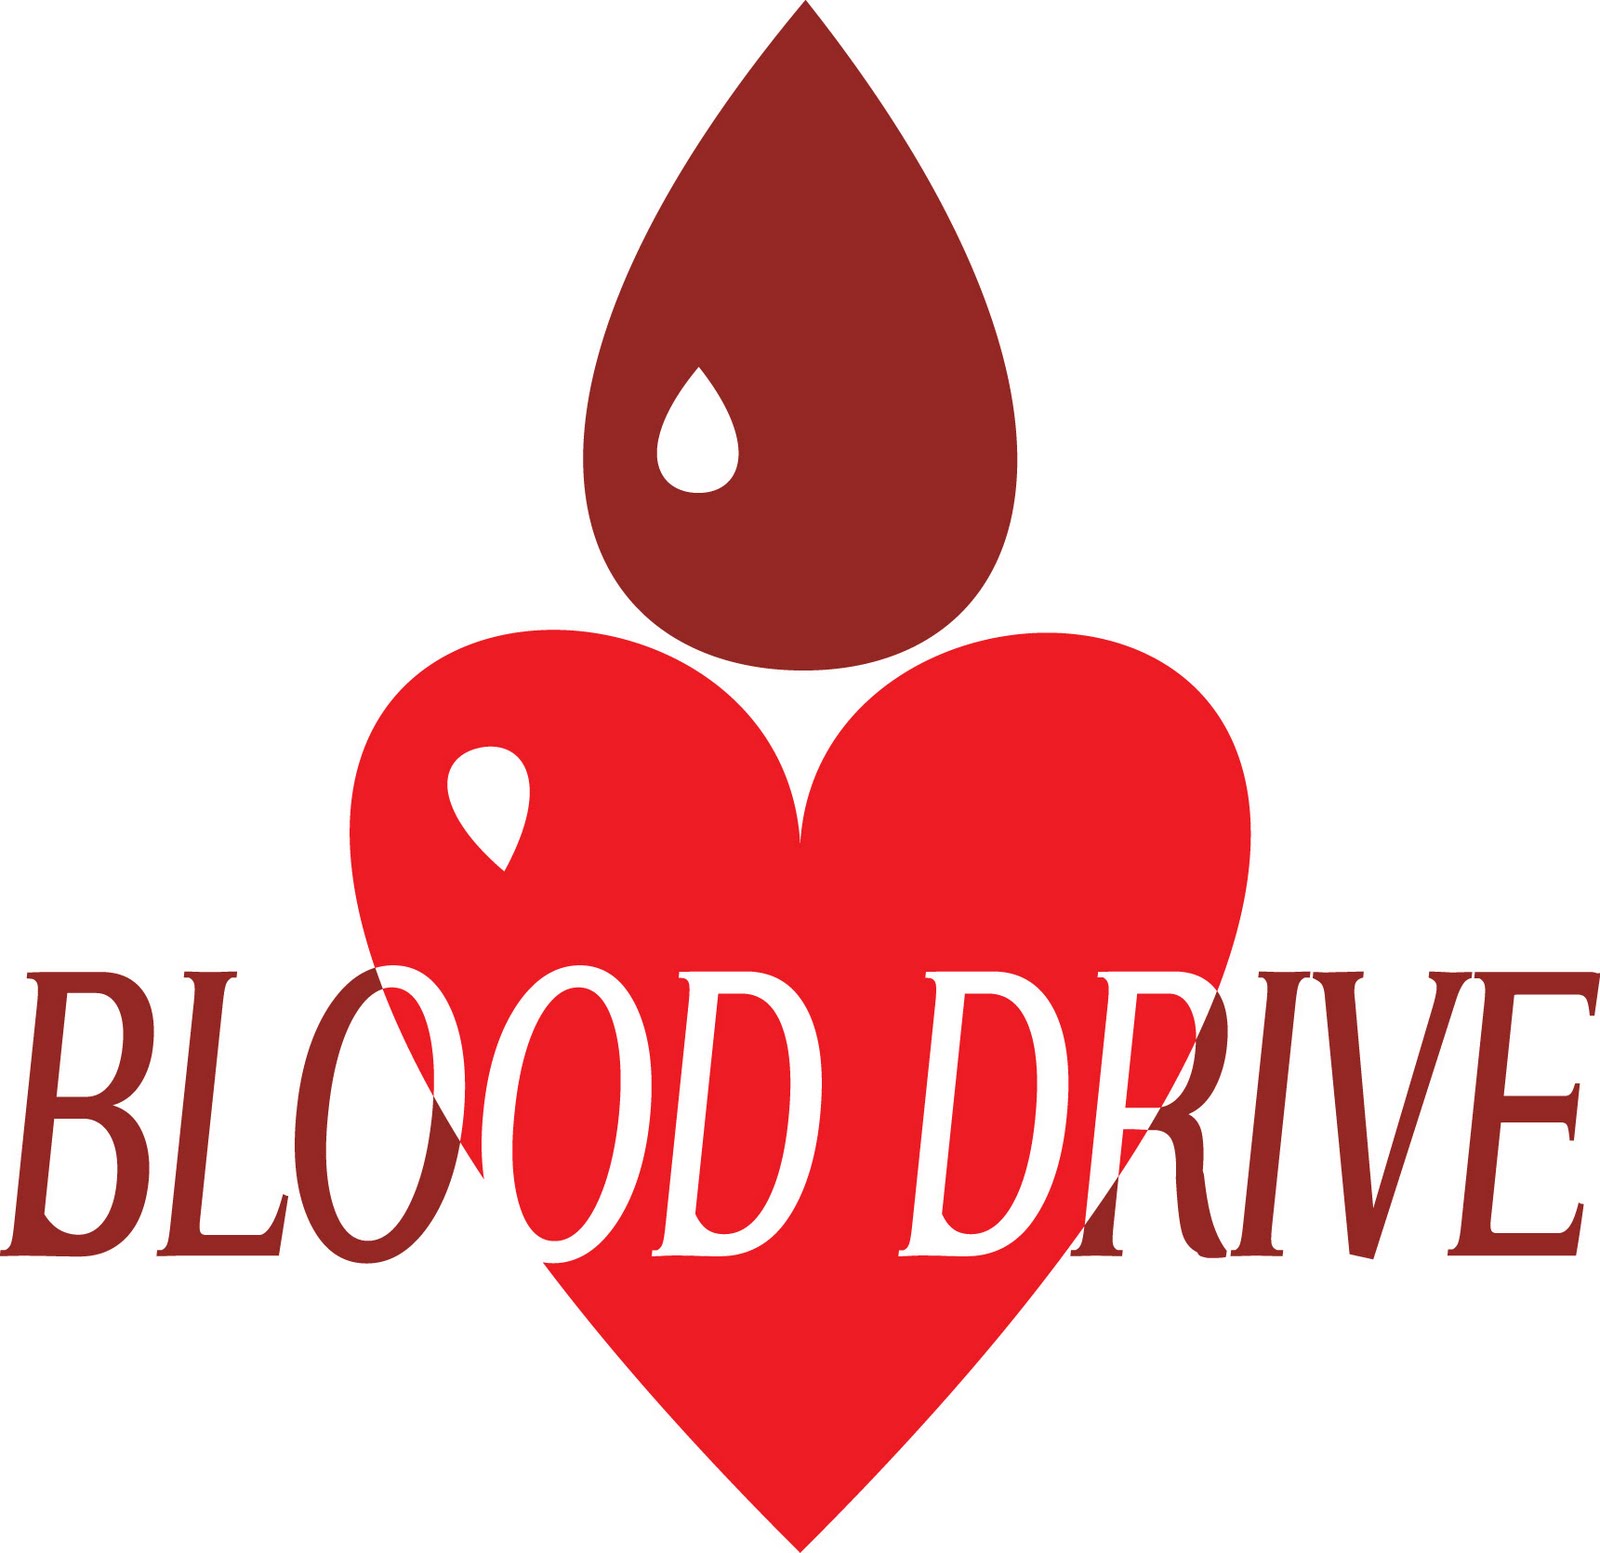 ... Blood drive thank you clipart ...